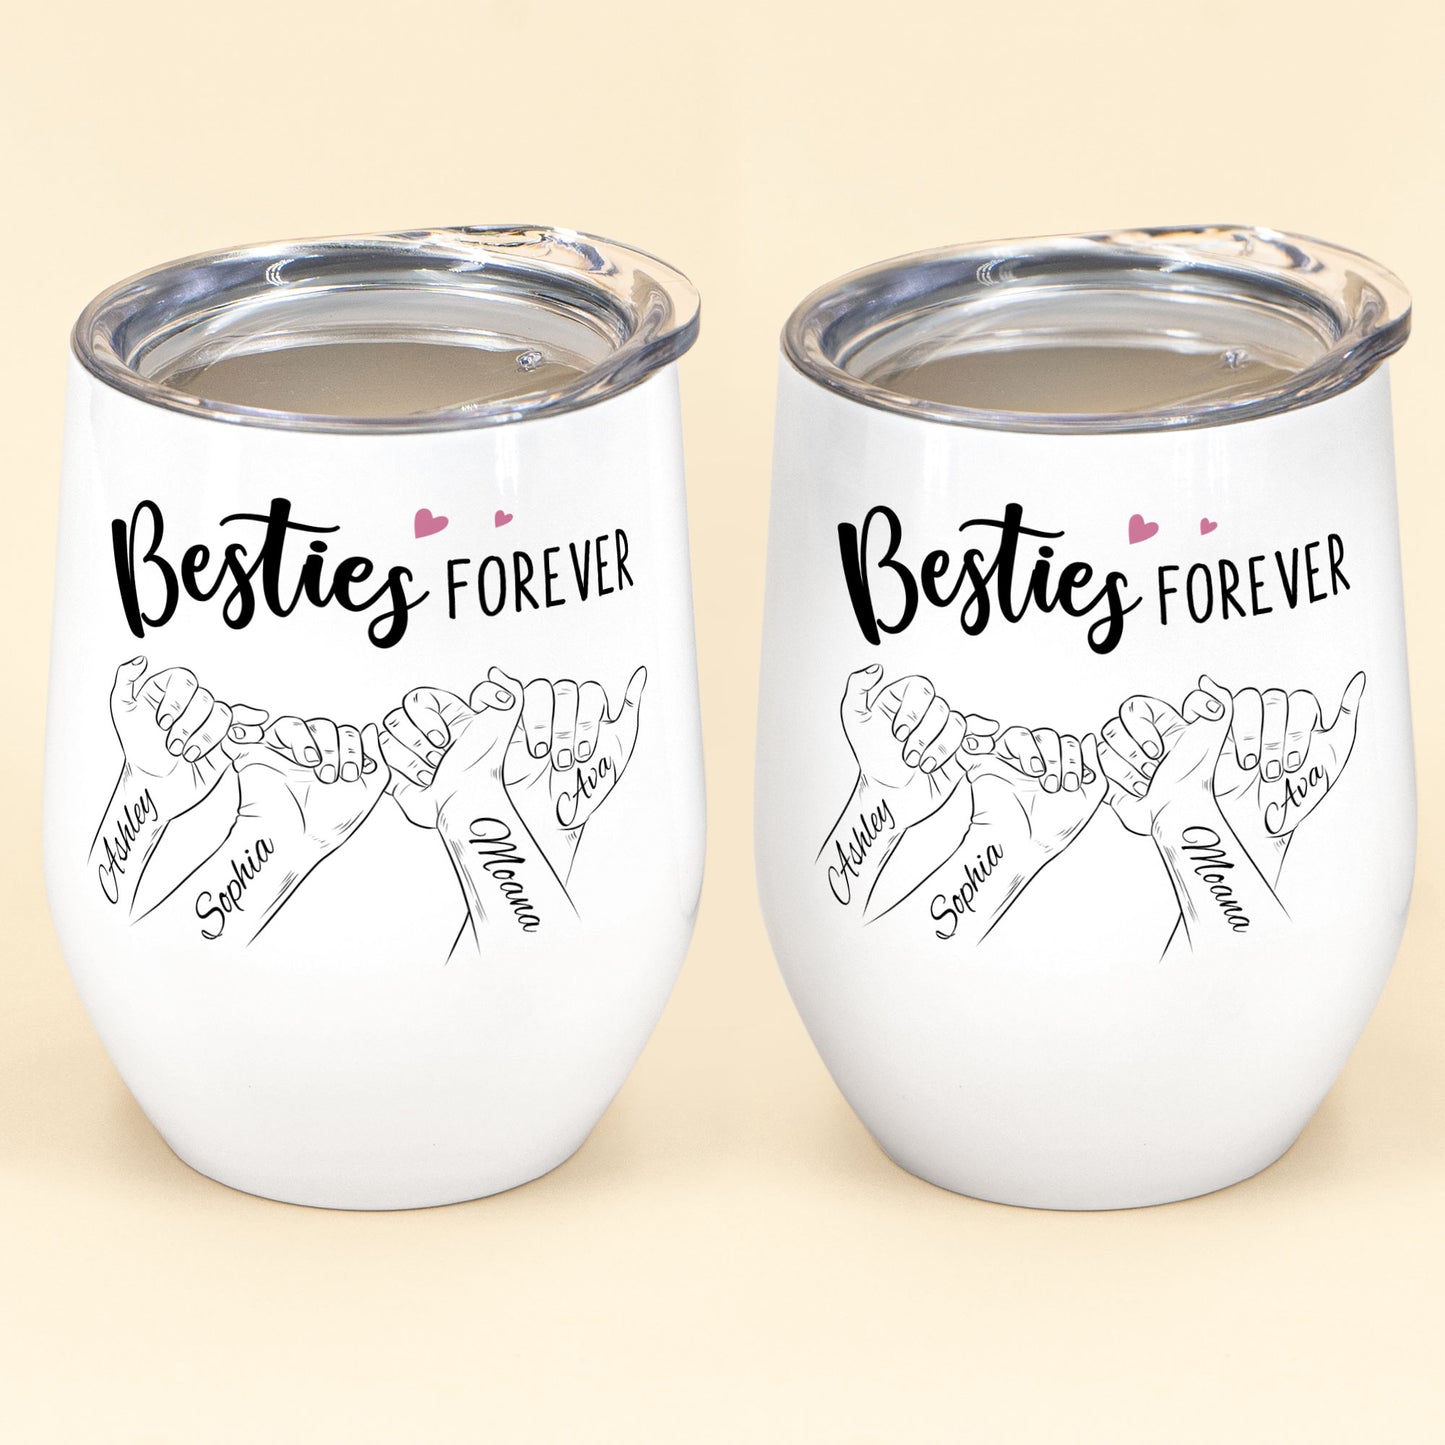 Besties Forever Pinky Promise - Personalized Wine Tumbler - Anniversary, Birthday Gift For Besties, Friends, BFF, Girl Crew